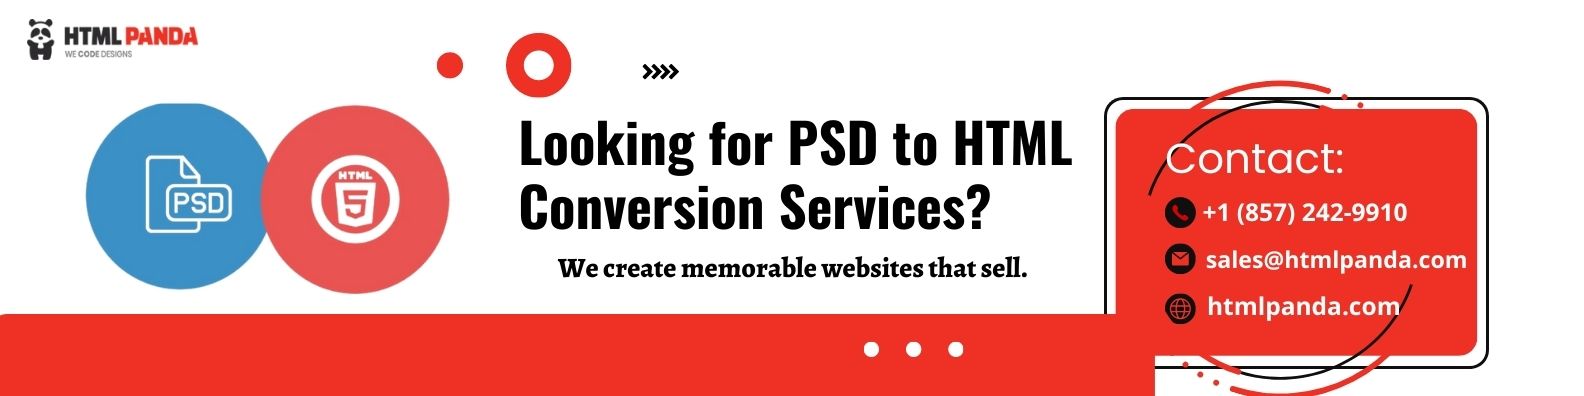 Looking for PSD to HTML Conversion Services?